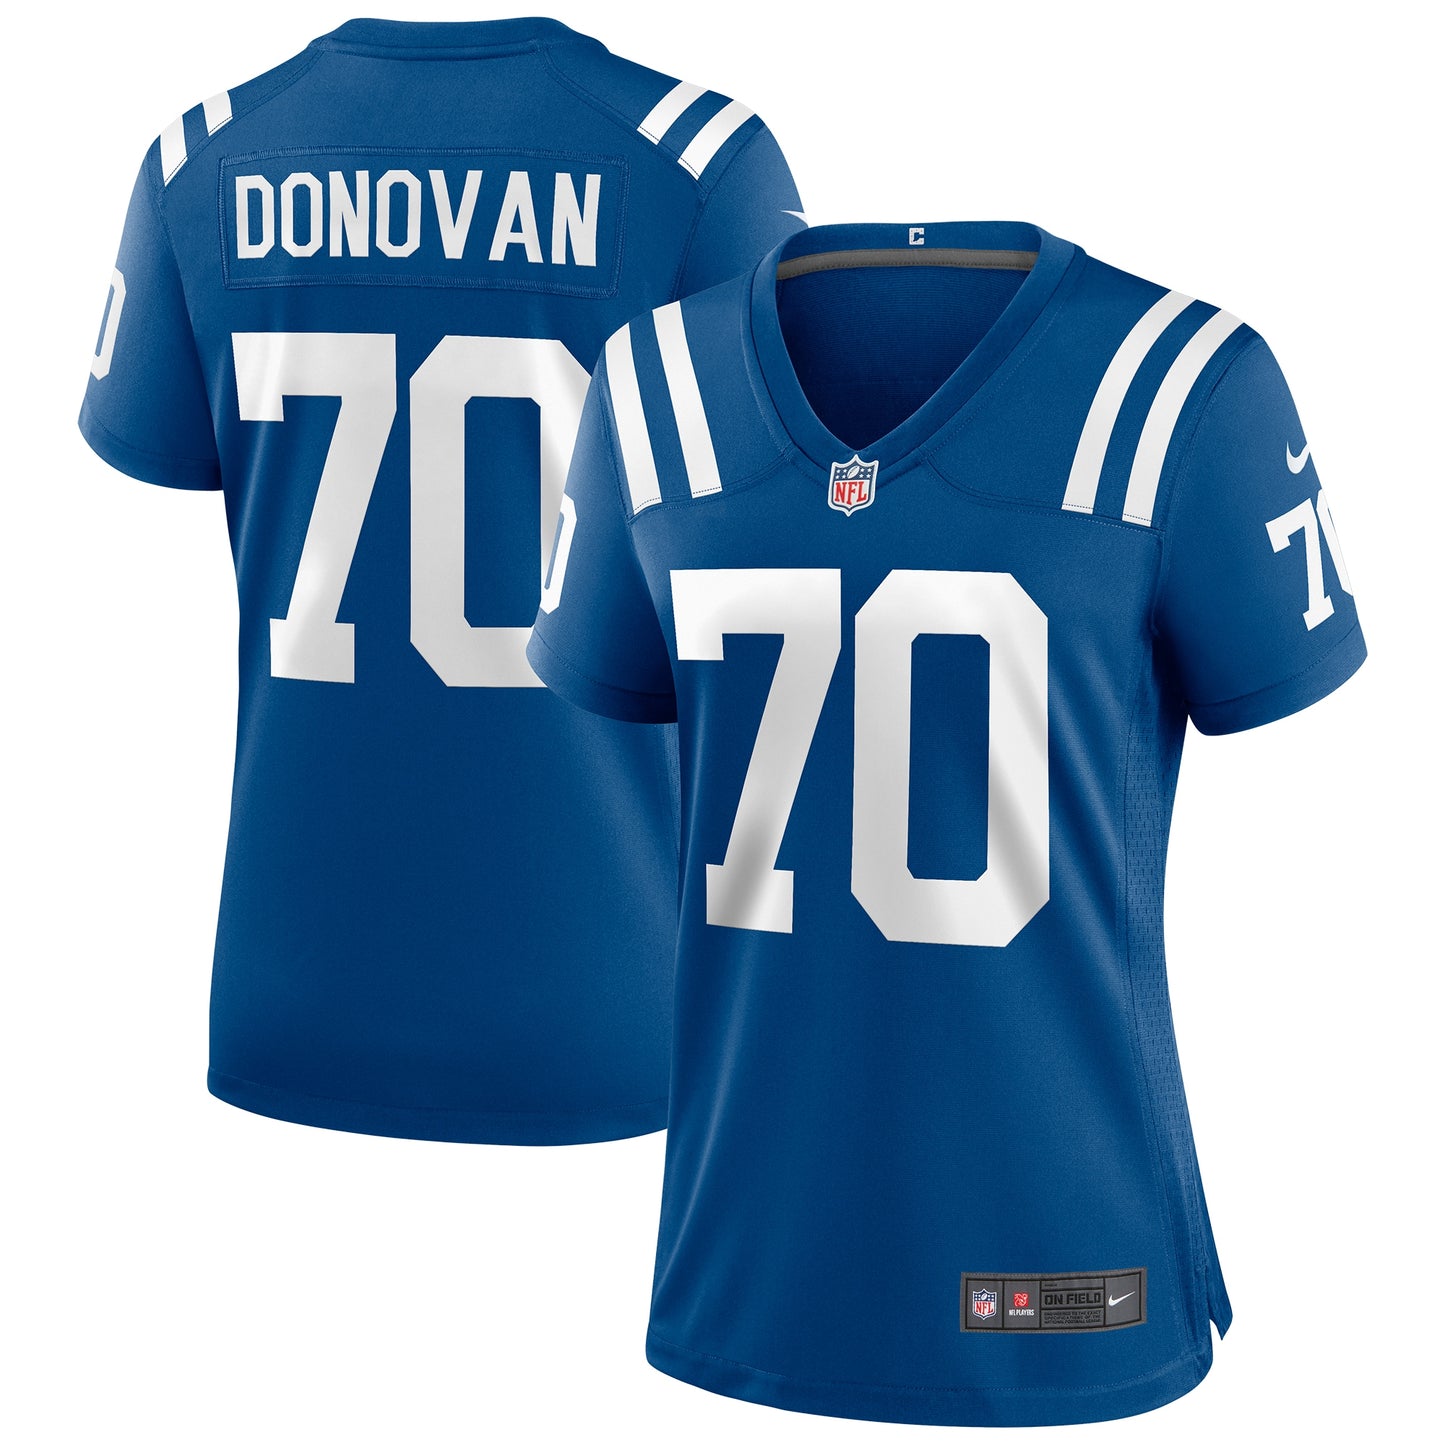 Art Donovan Indianapolis Colts Nike Women's Game Retired Player Jersey - Royal